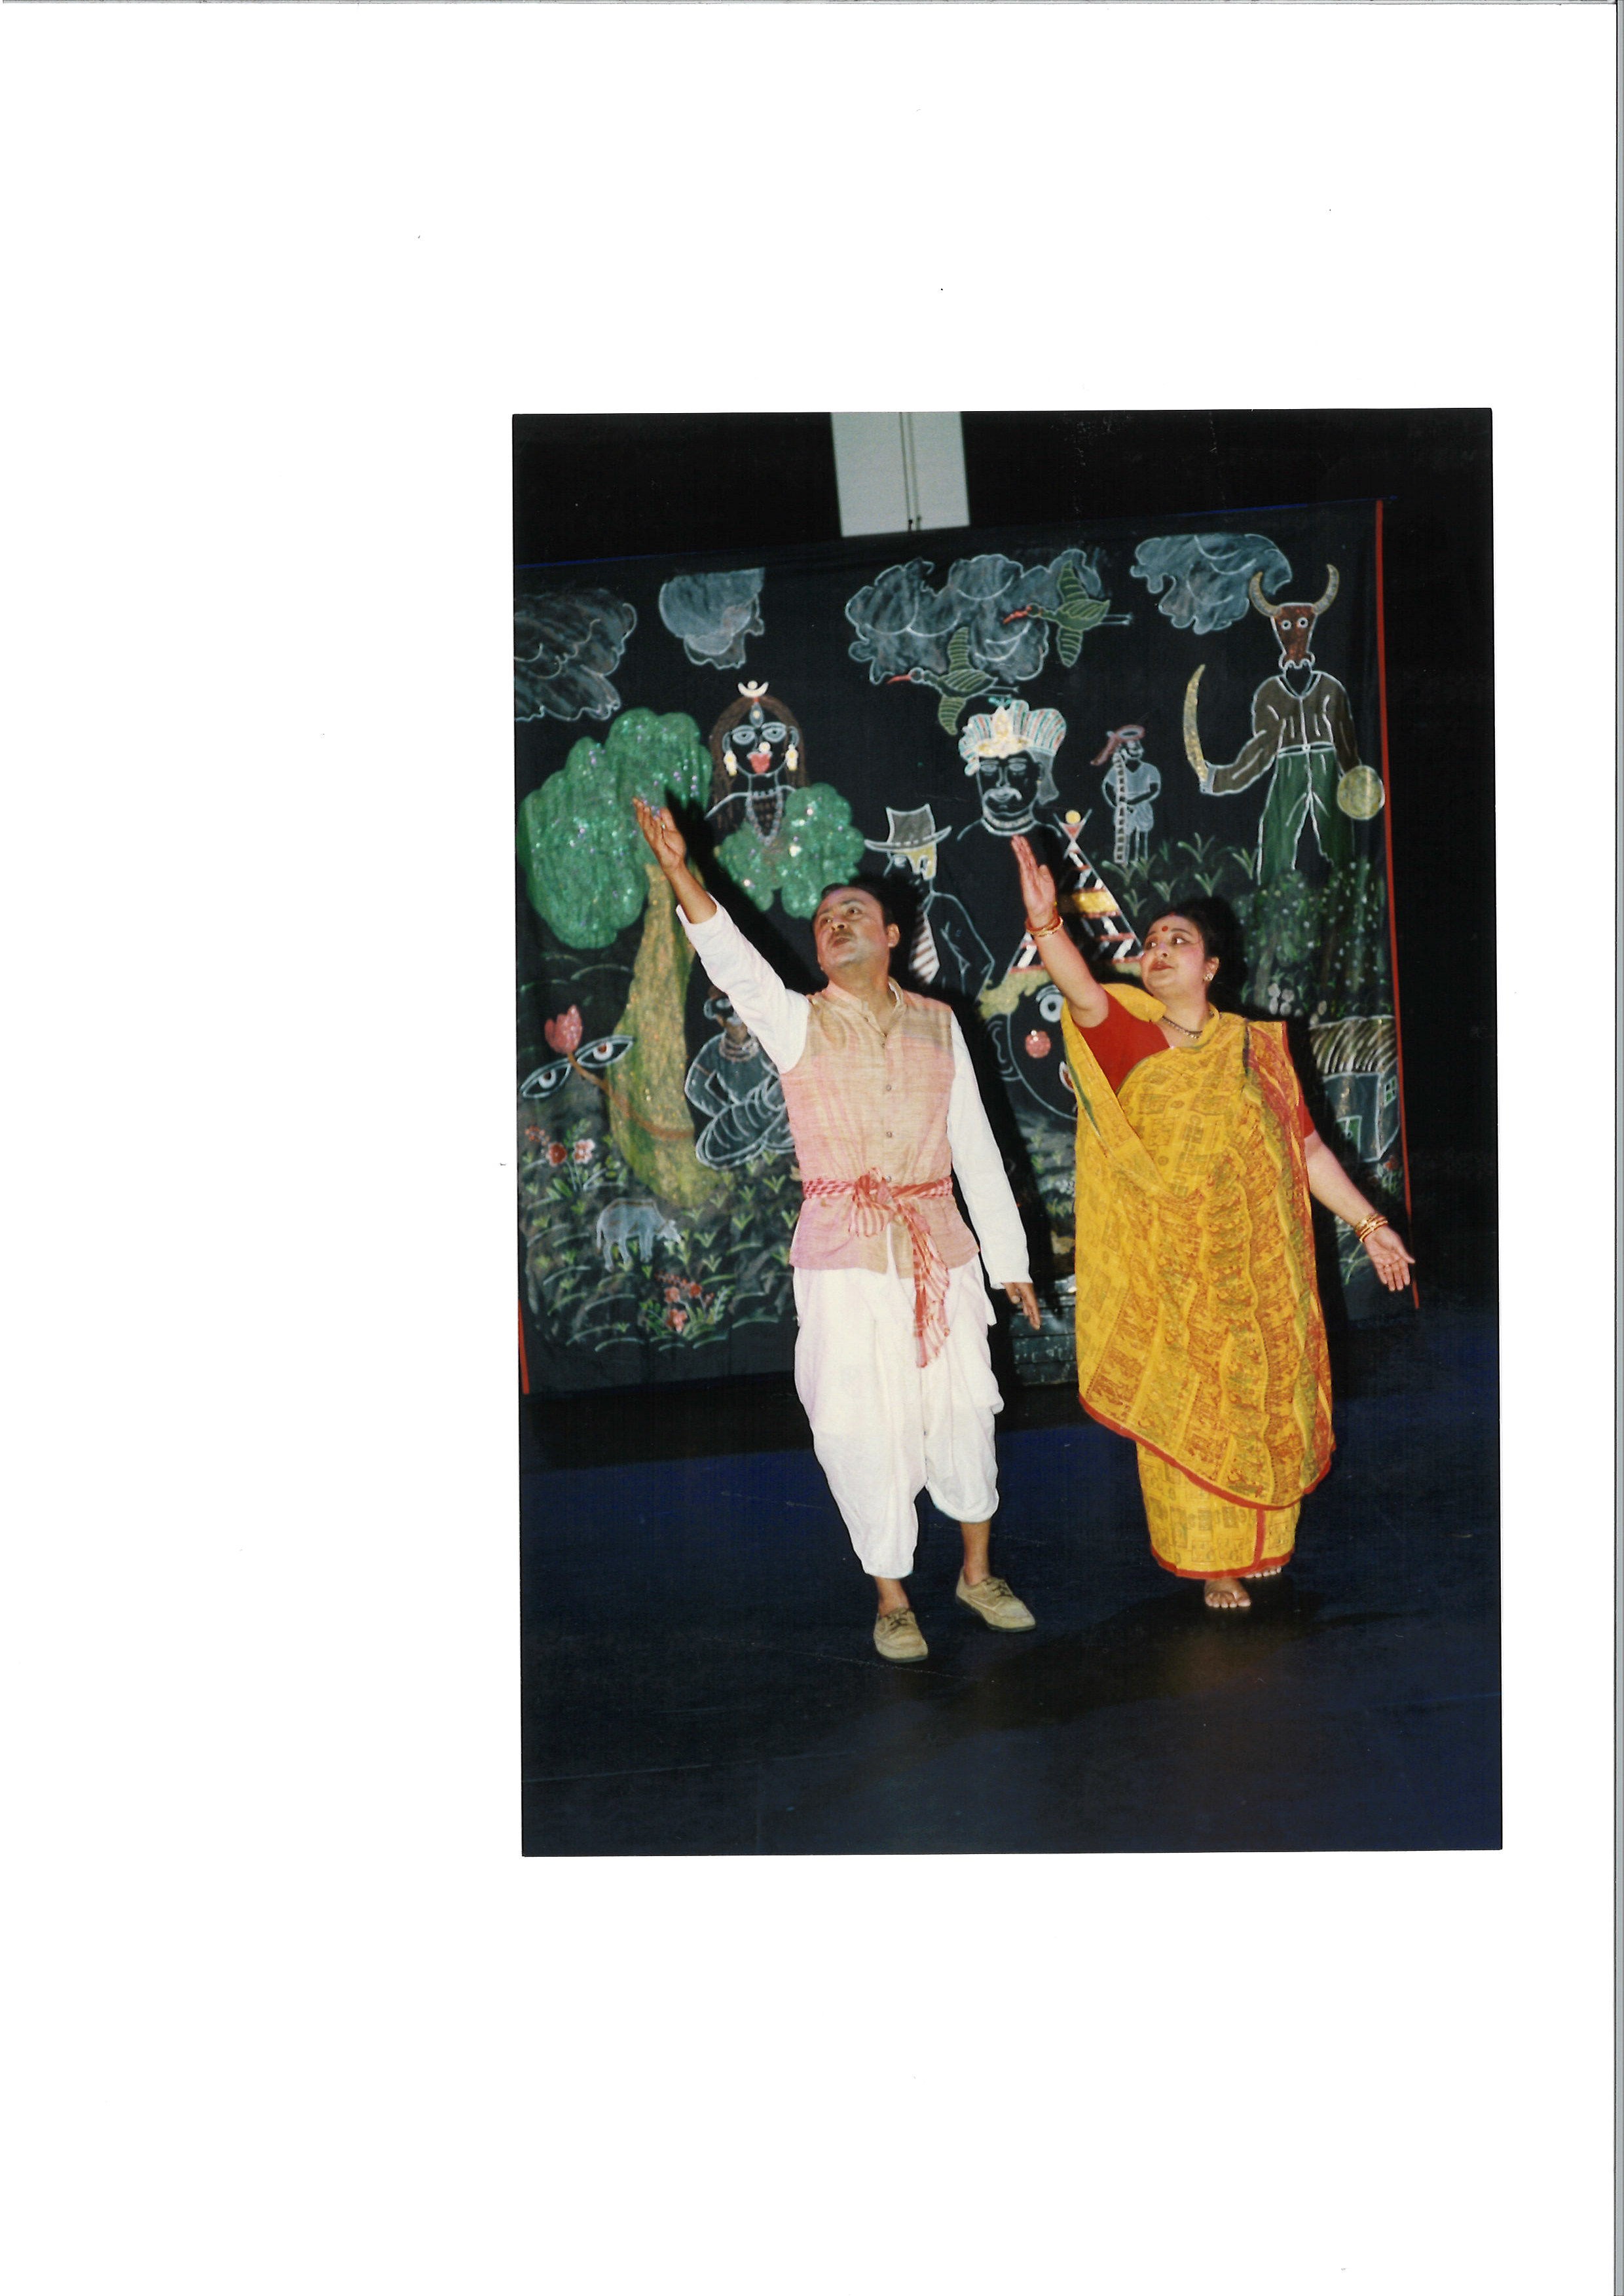 A man and woman with their right arms outstretched, dancing in front of a beautifully embroidered backdrop